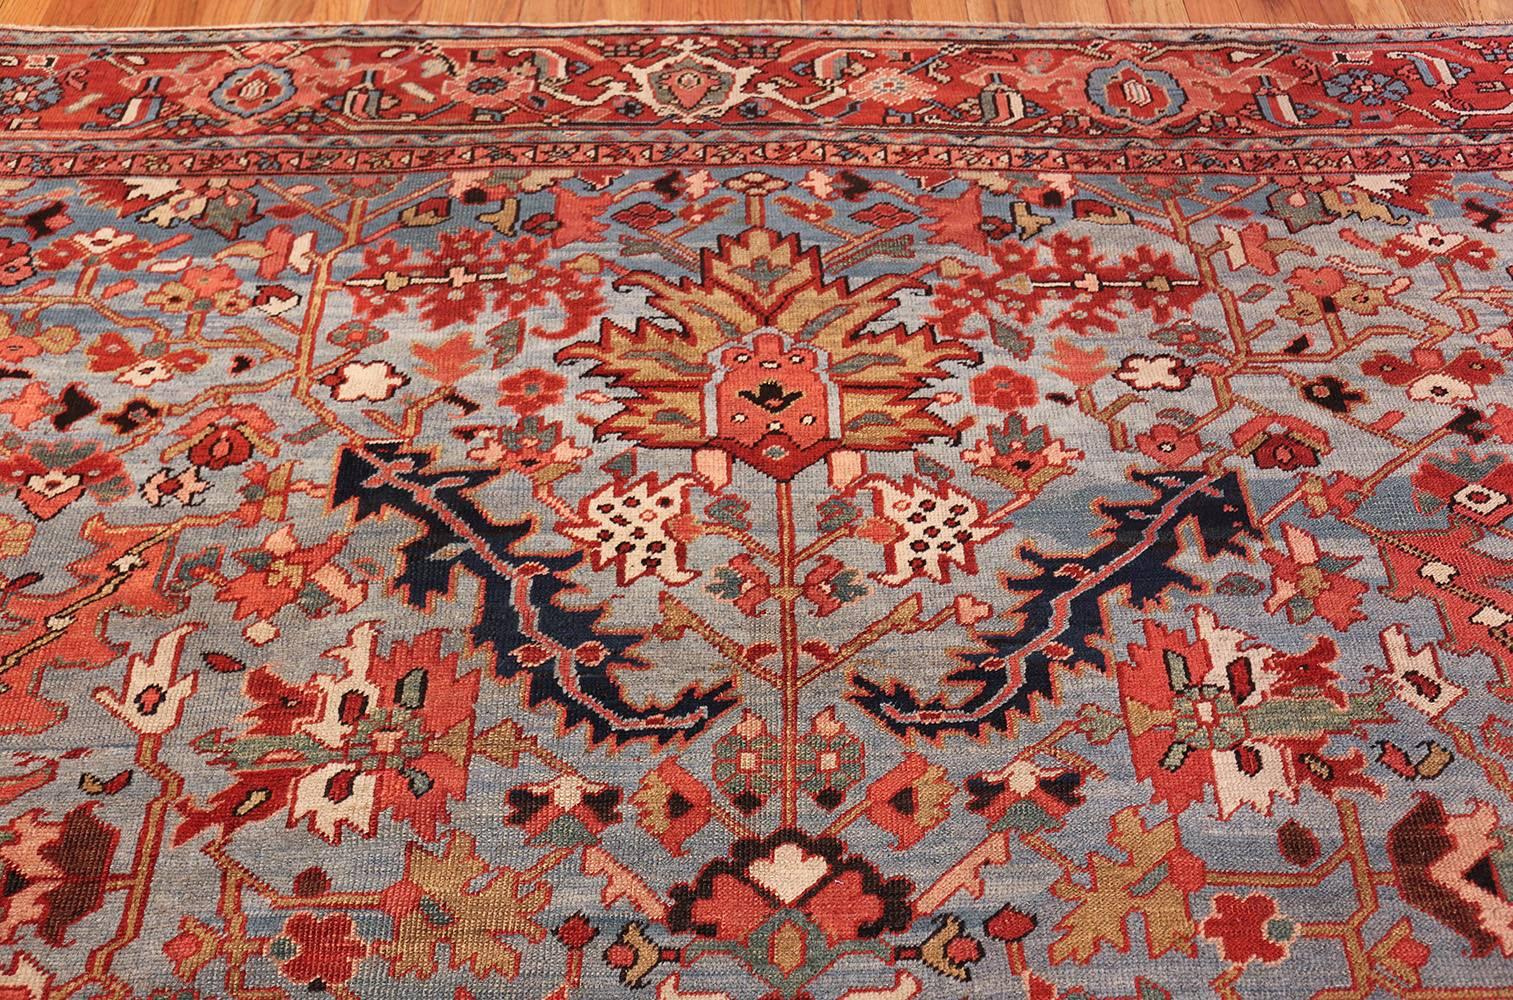 Magnificent antique blue background Heriz Persian rug 49374, country of origin / rug type: Persian rug, date circa 1900s. Some works of art are meant to soothe the spirit and calm the nerves, others are meant to dazzle the mind and engulf the soul